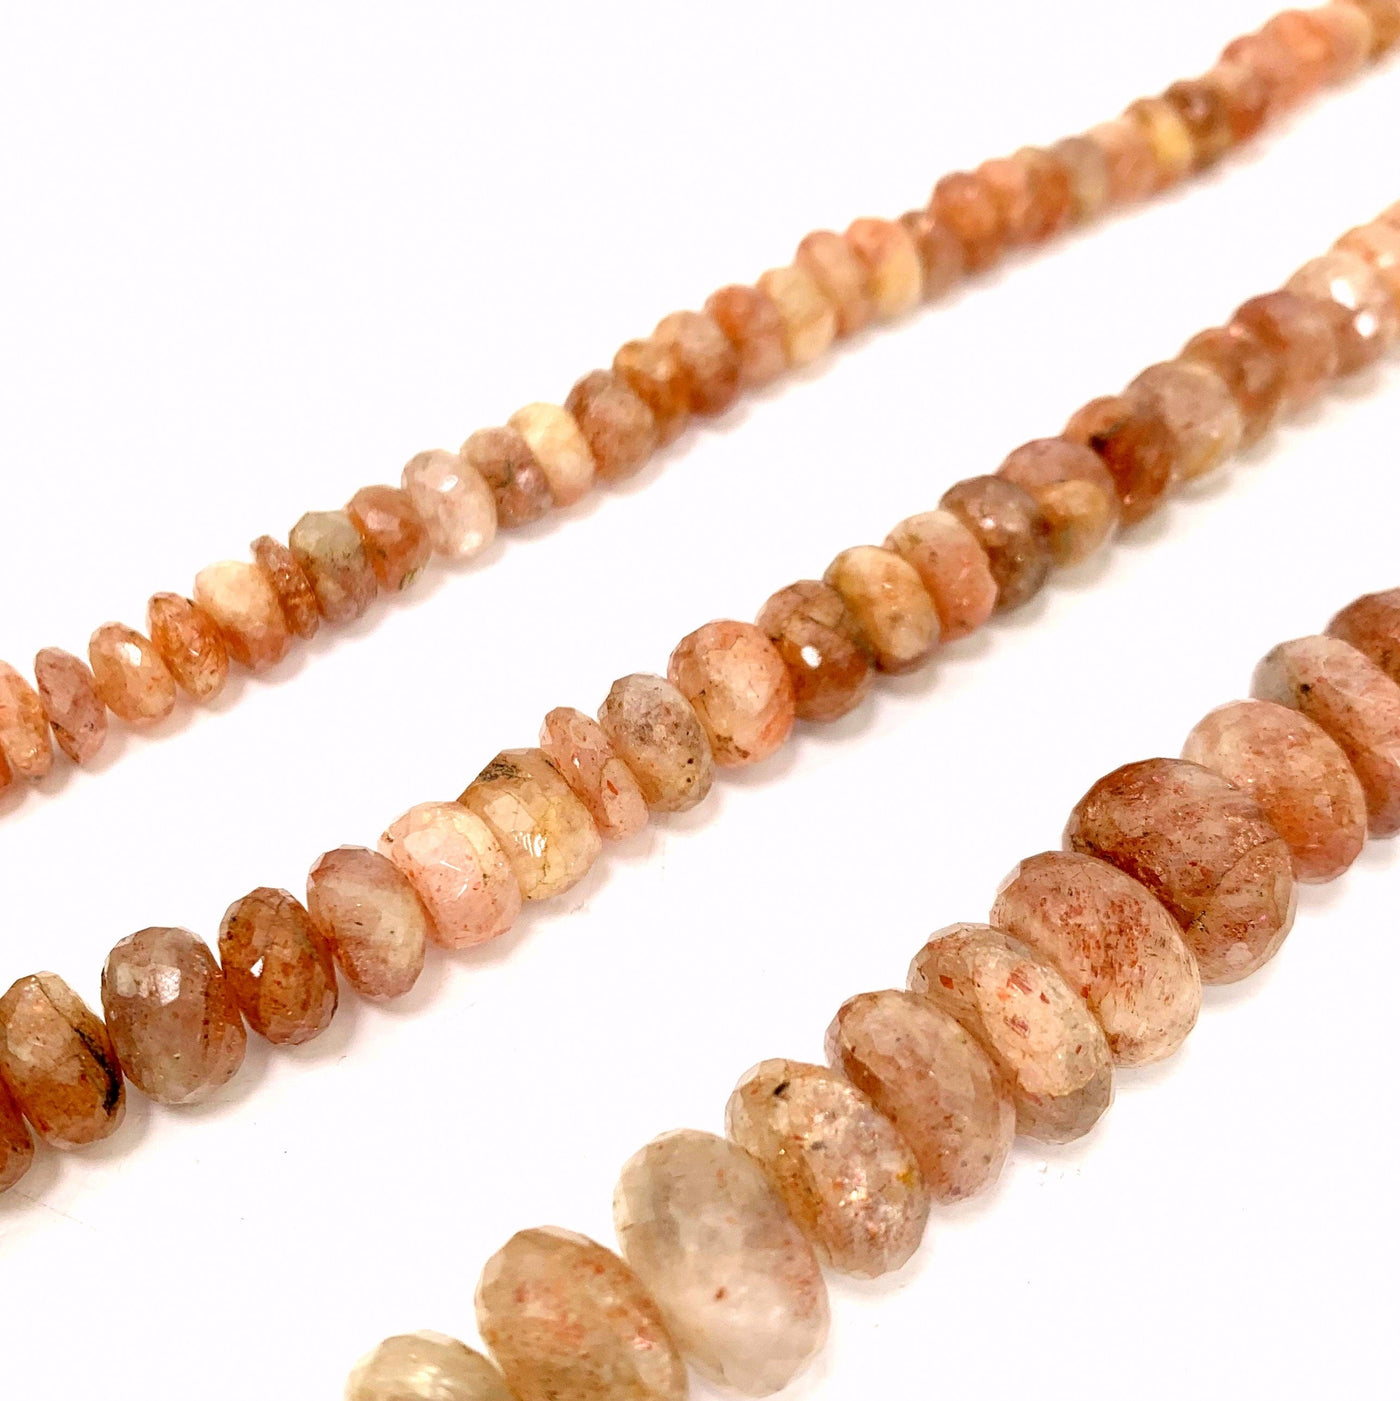 all 3 variations of sunstone faceted beads ( top small, middle medium, bottom Large) on a white background